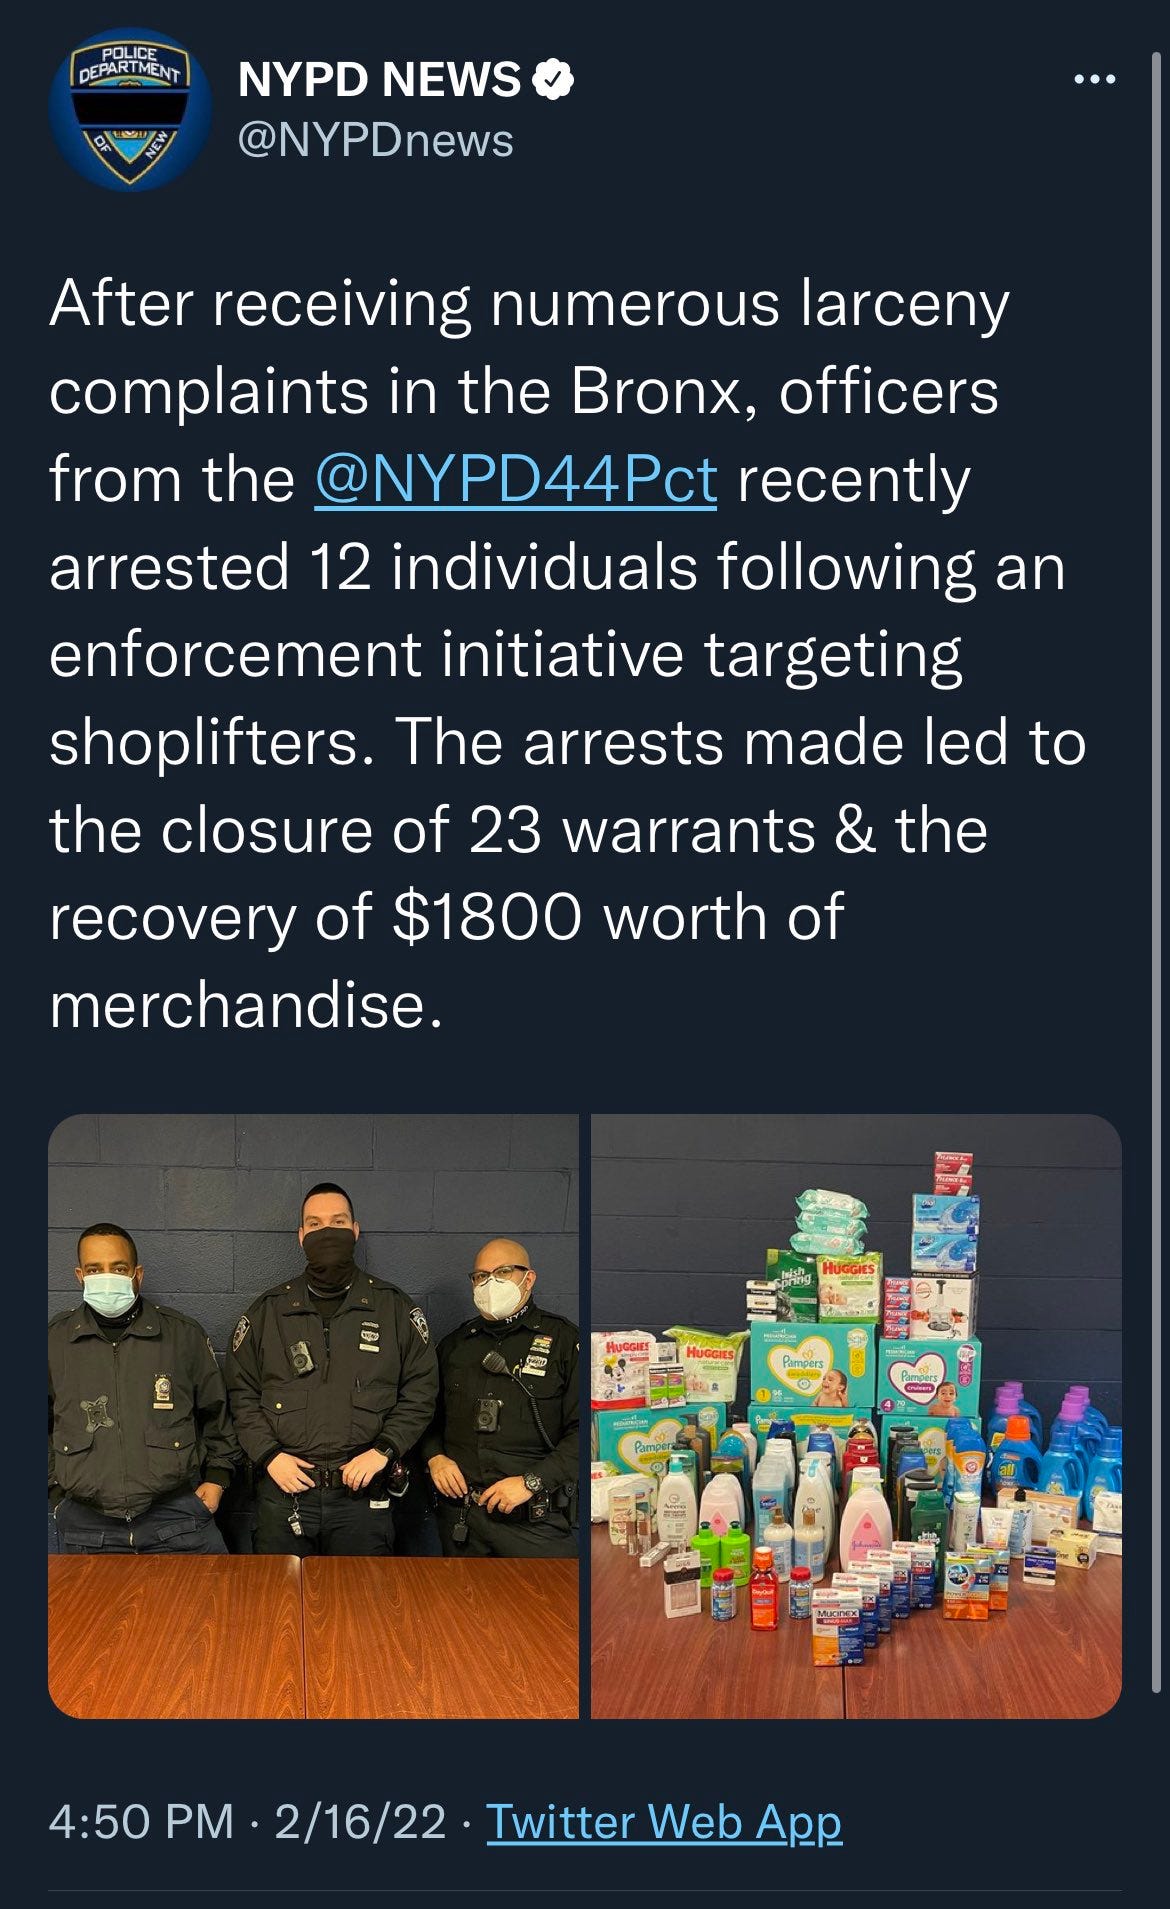 Tweet from NYPD News that shares they arrested 12 people and recovered items. The picture of recovered items includes diapers, detergent, wipes, and other similar goods.